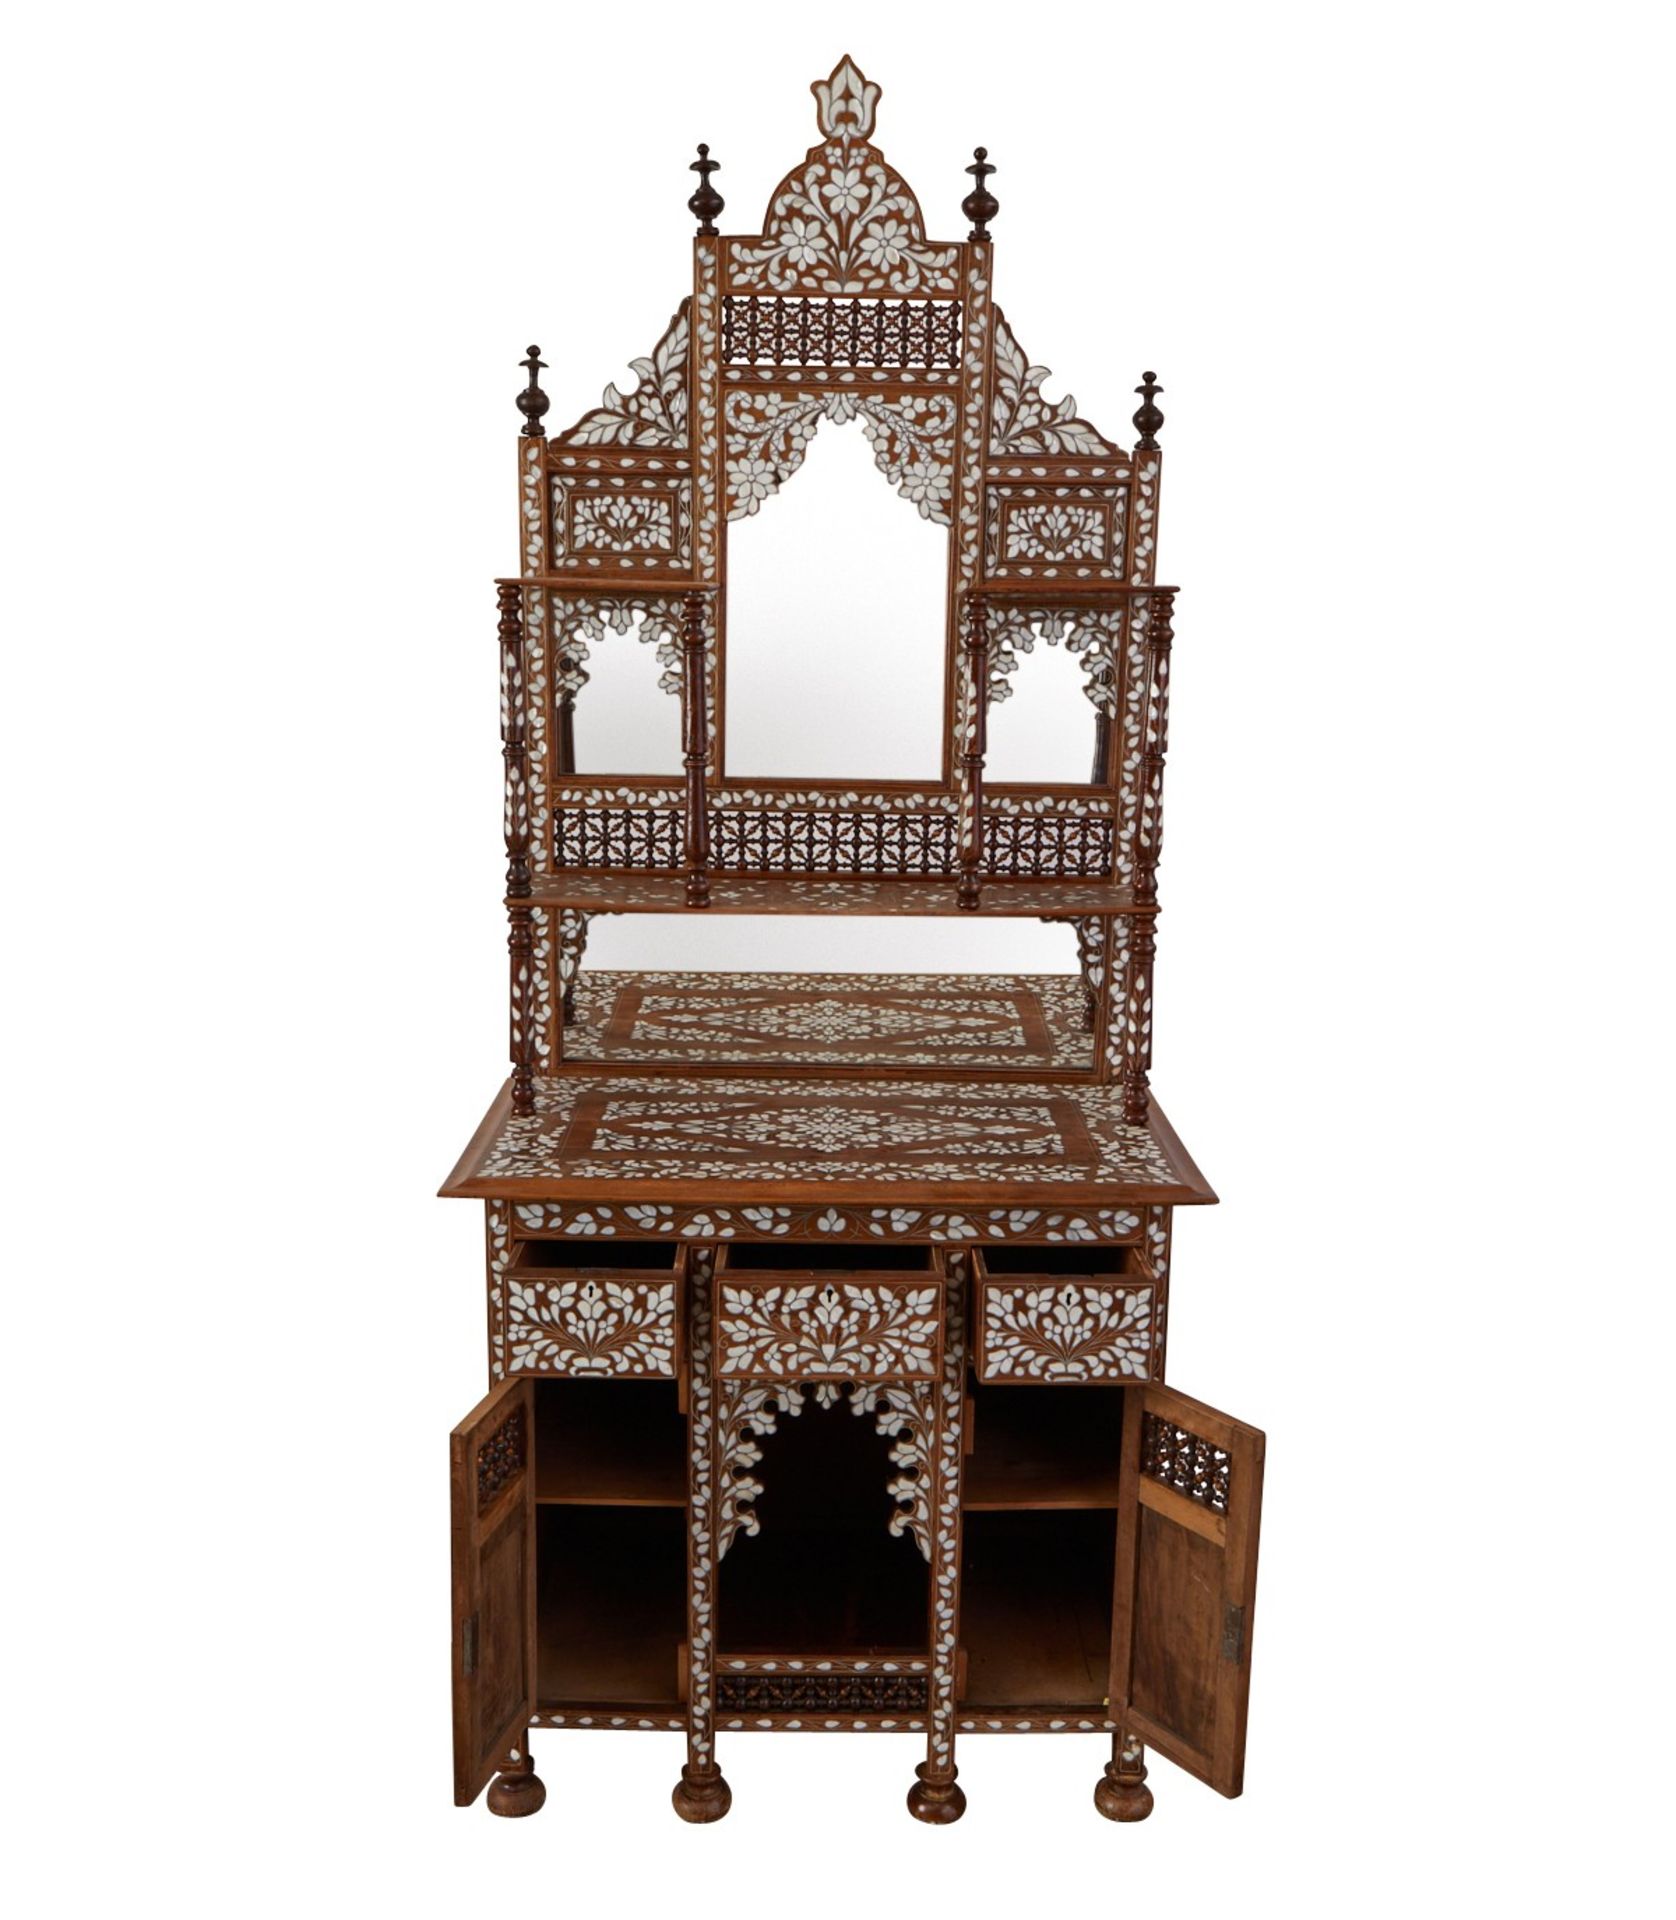 Syrian Mother of Pearl Inlaid Dressing Table - Image 10 of 10